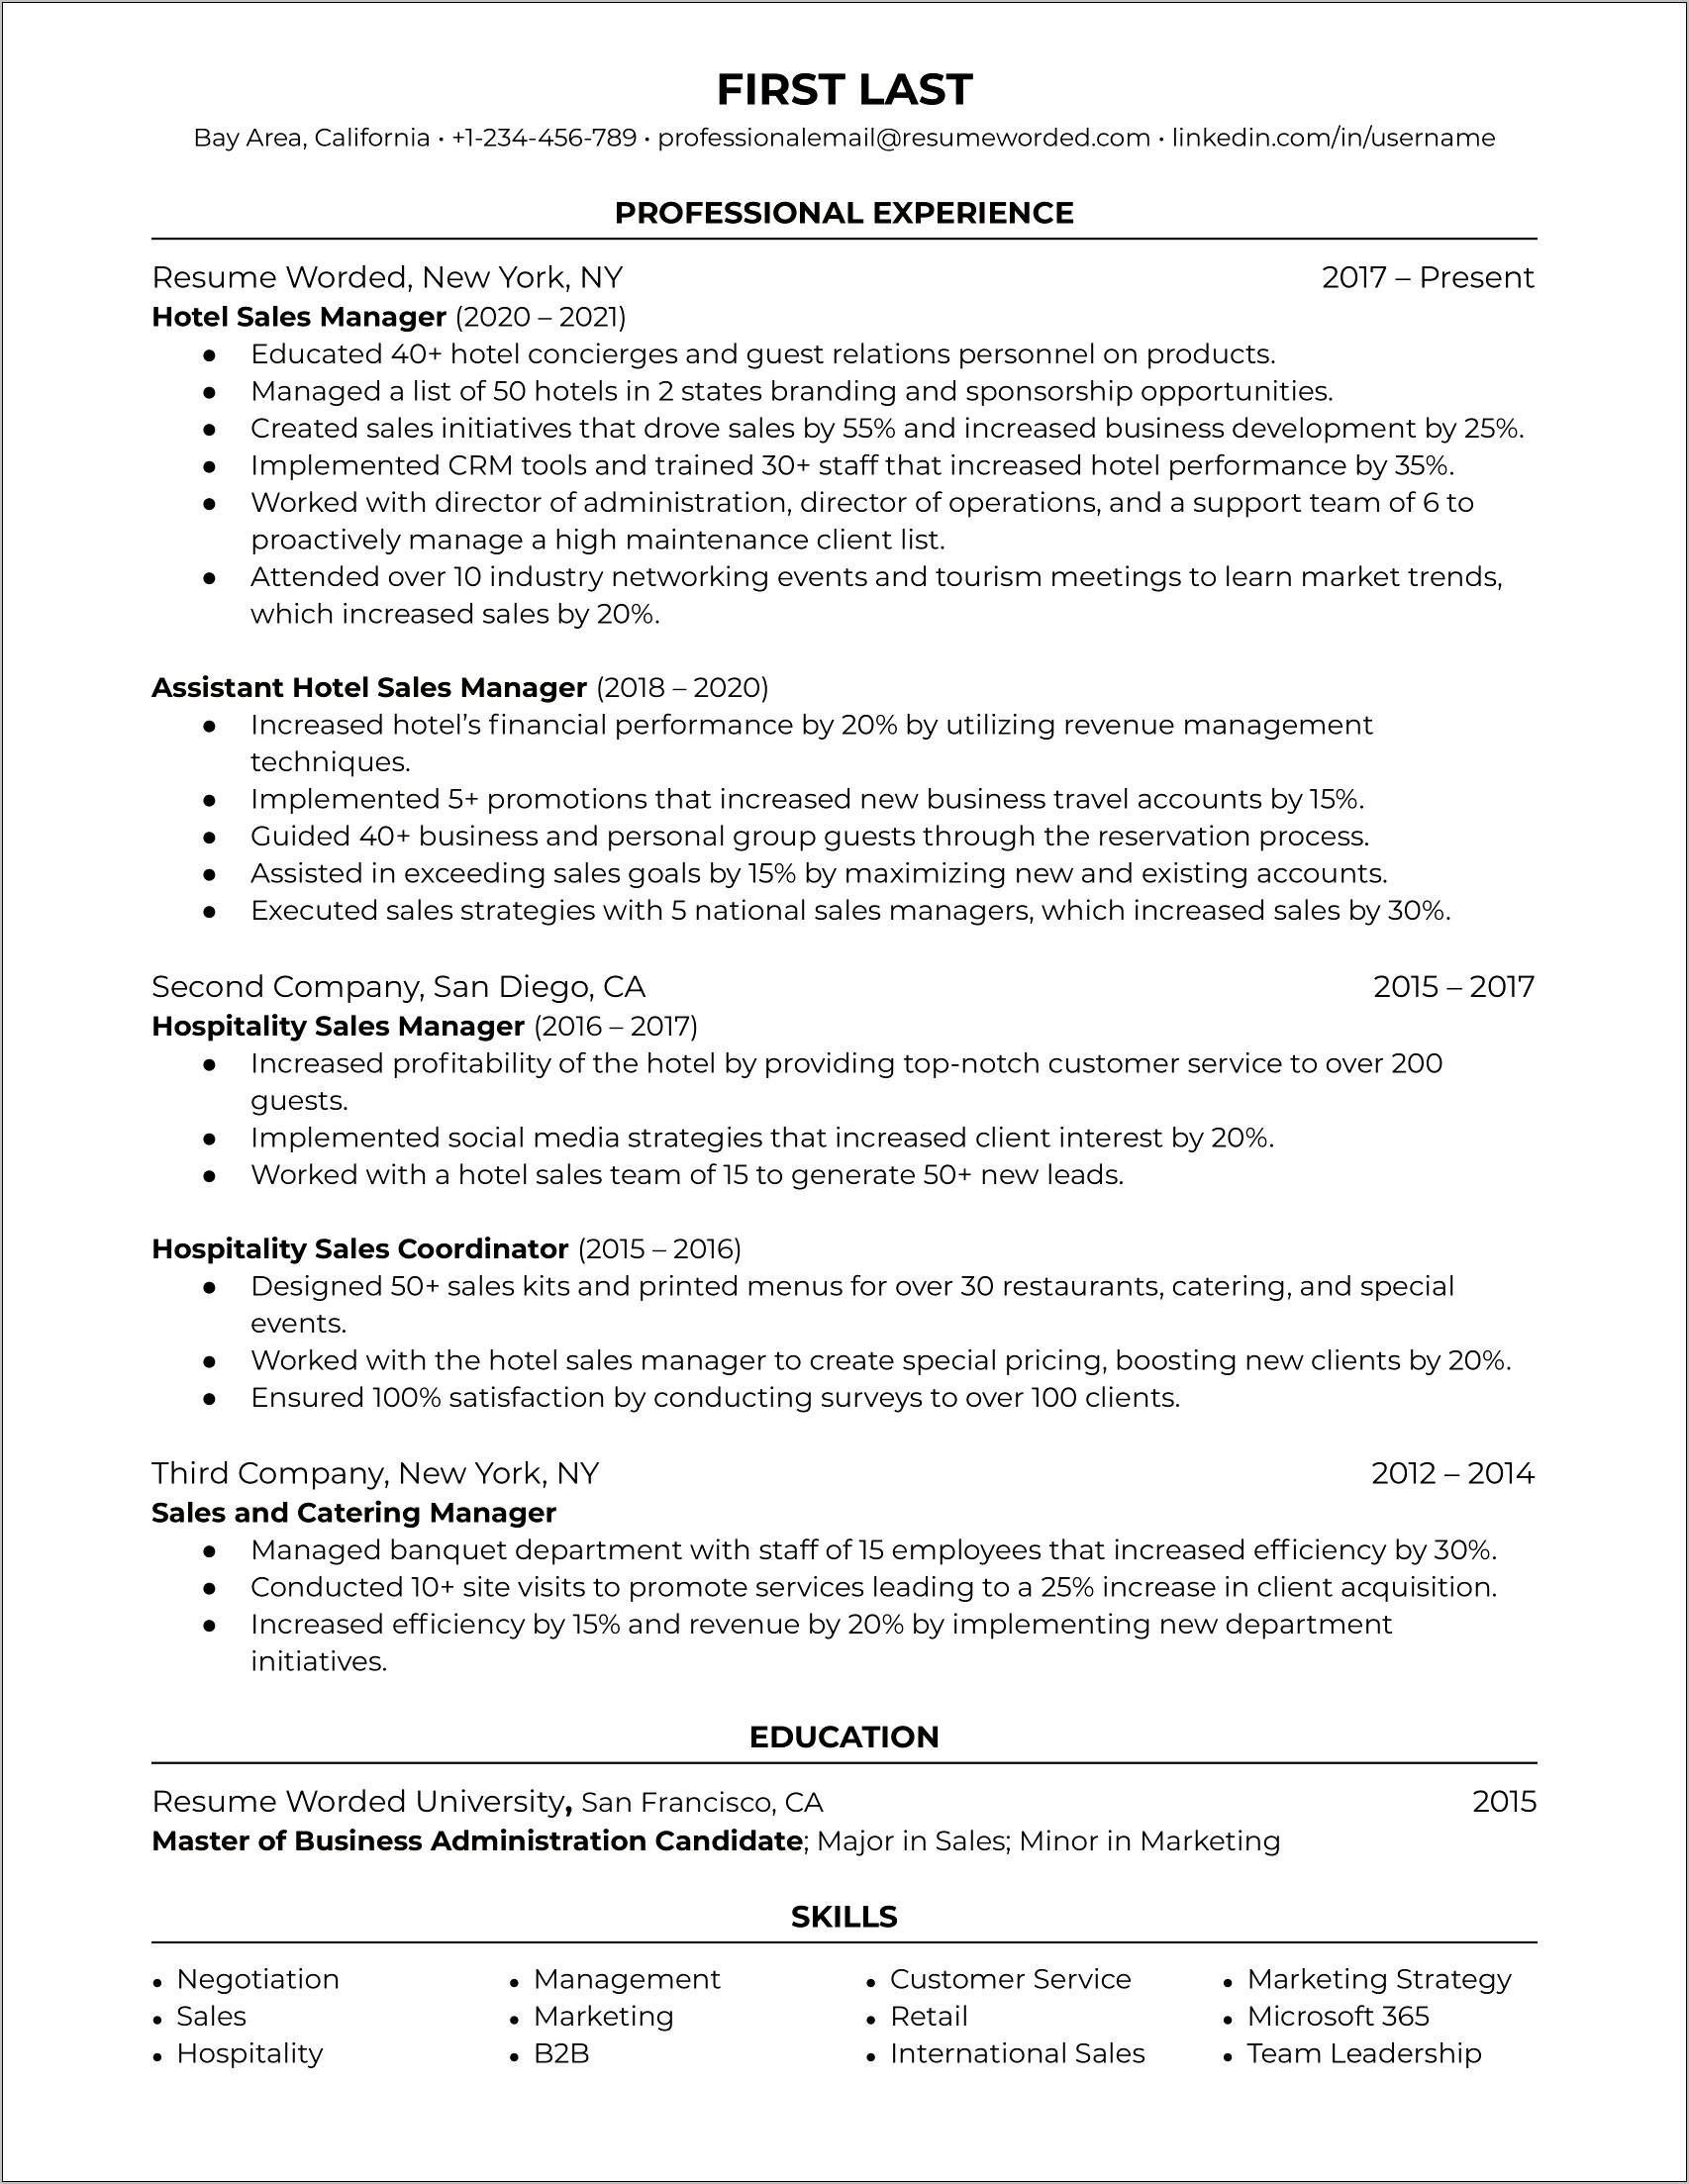 Resume Format For Hotel Management Trainee